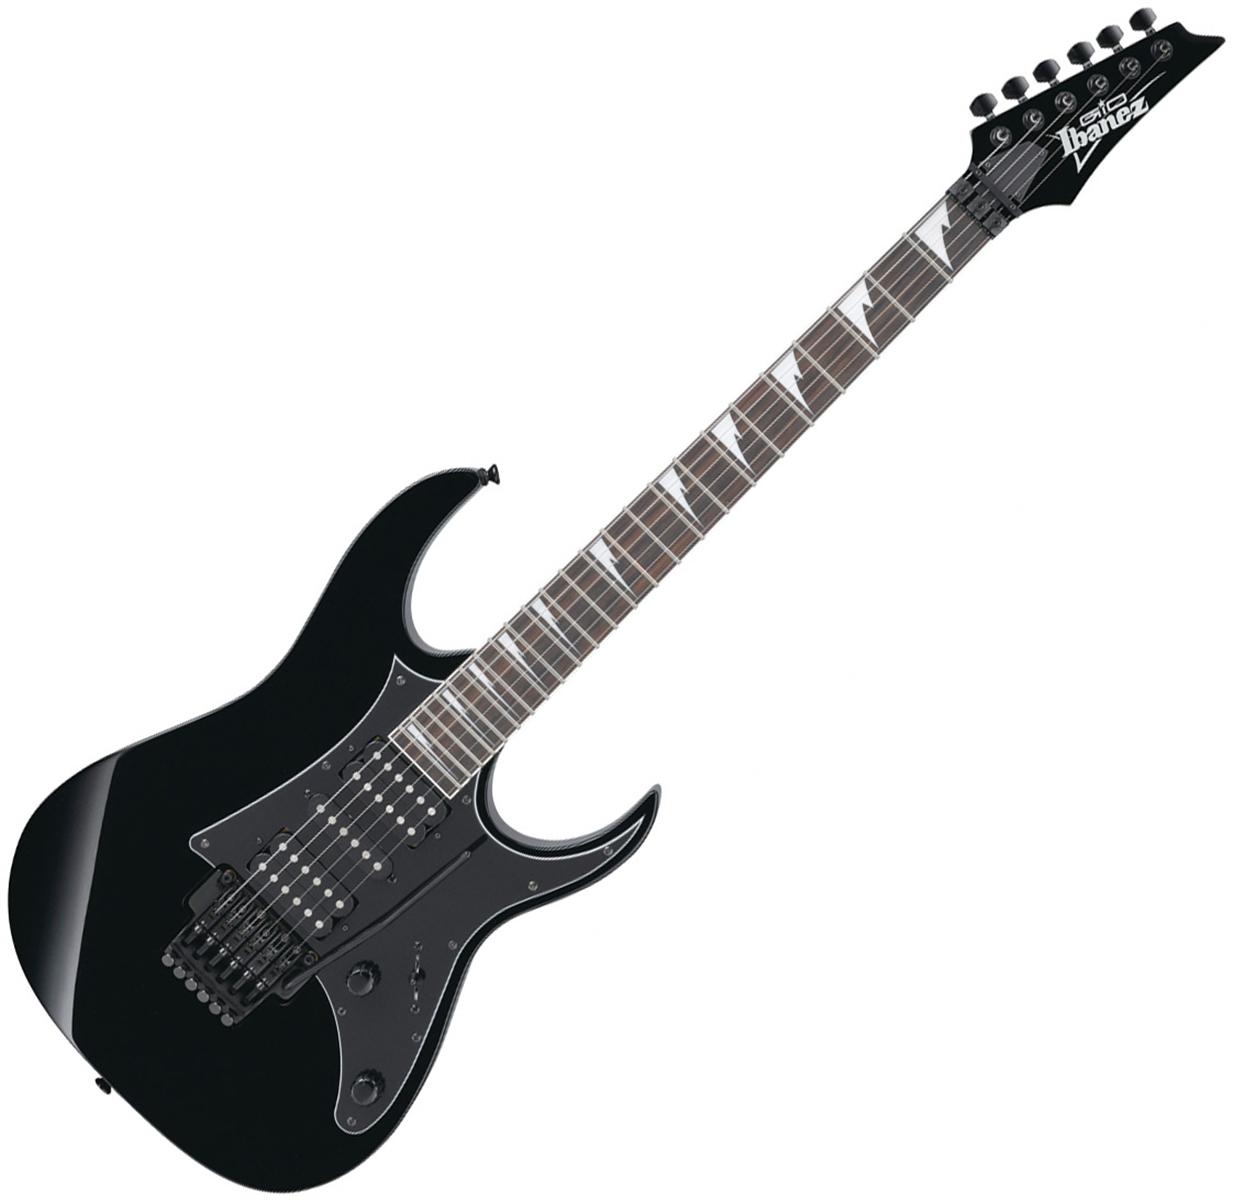 Guitar  black and white electric guitar clipart black and white clipartfest